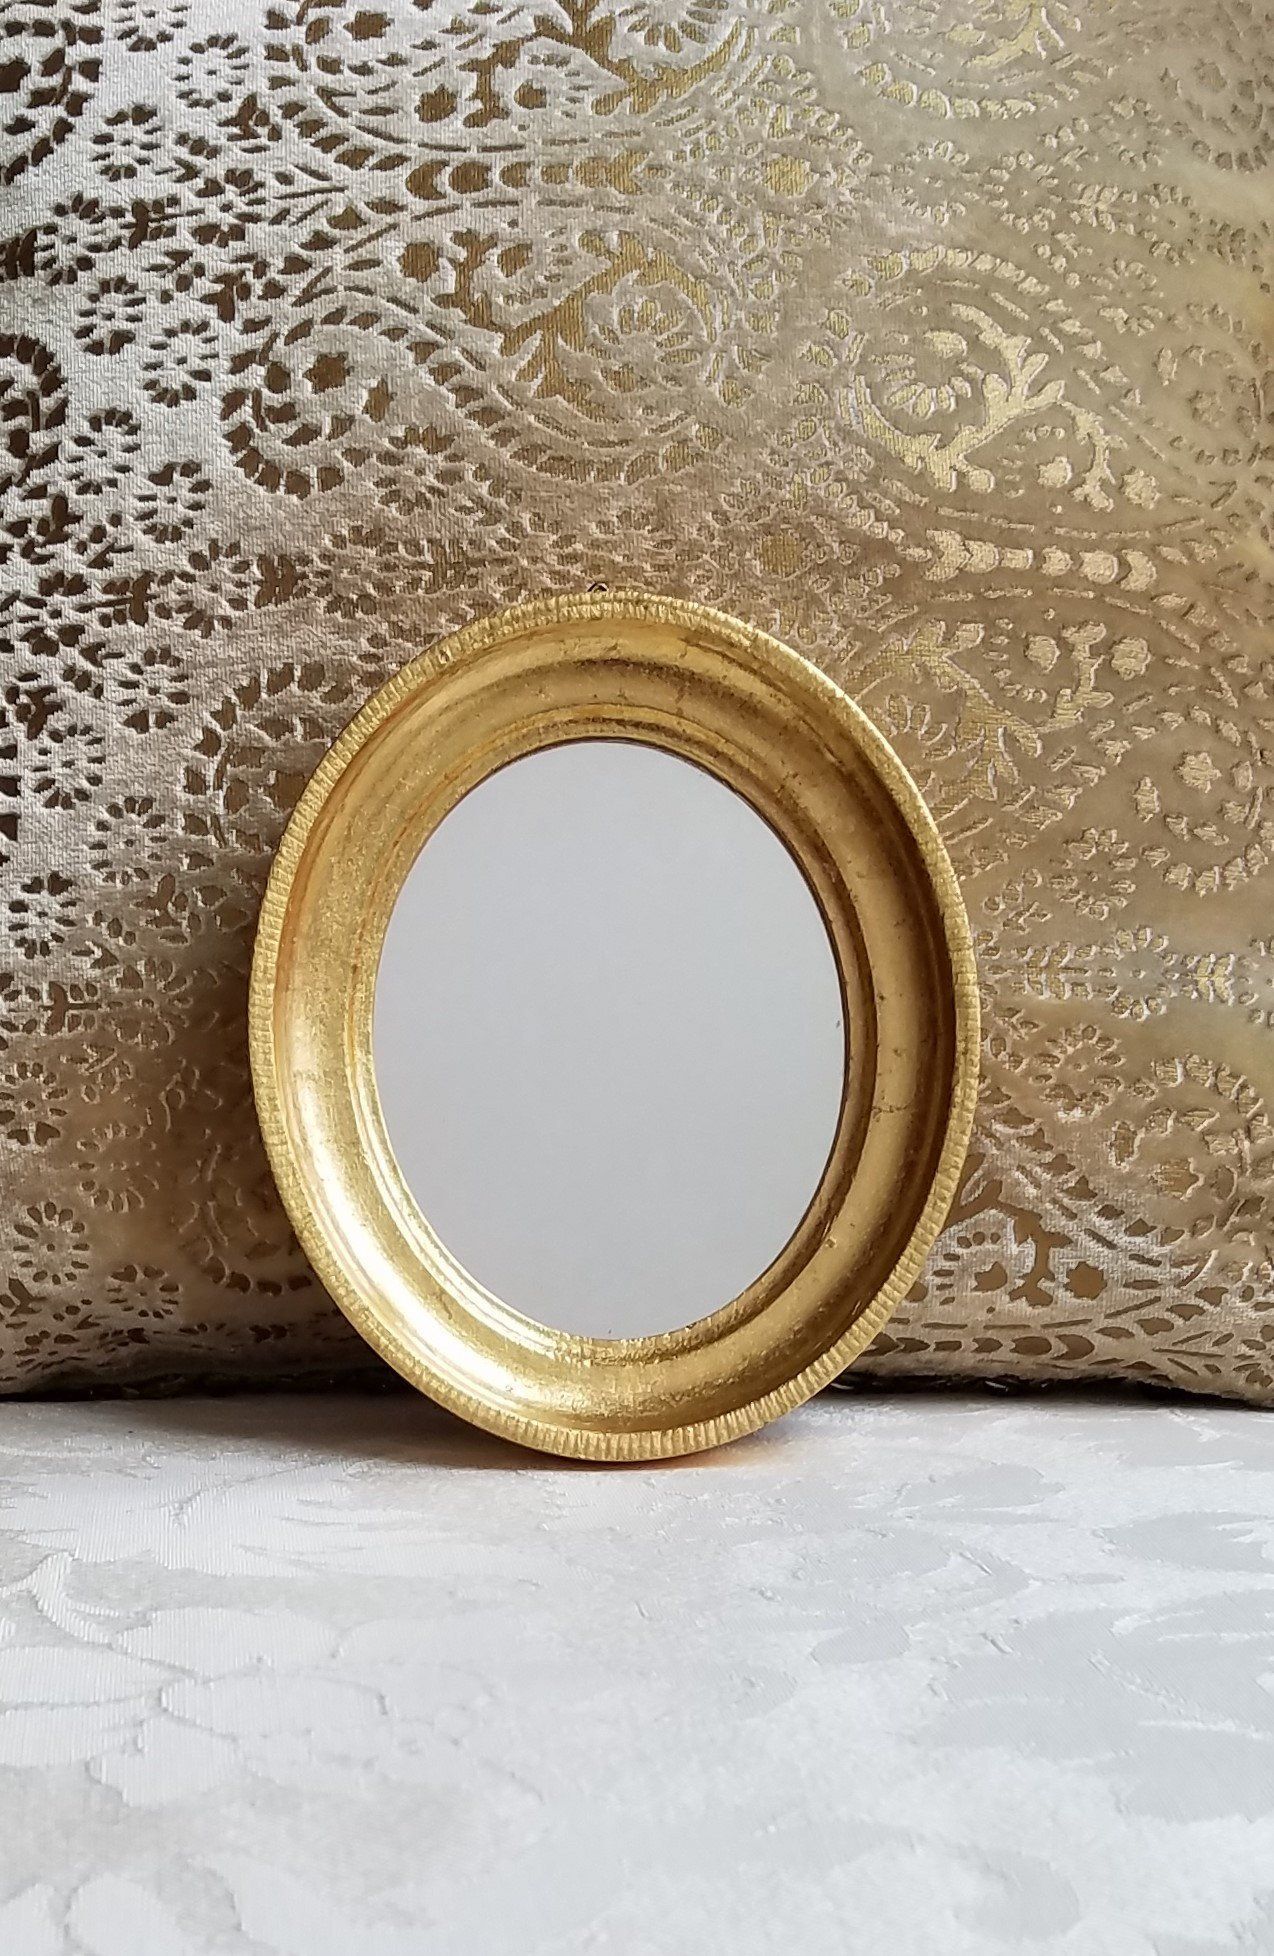 Vintage Gold Wall Mirror Small Oval Florentine Beveled Made In Italy Inside 2017 Gold Metal Mirrored Wall Art (View 17 of 20)